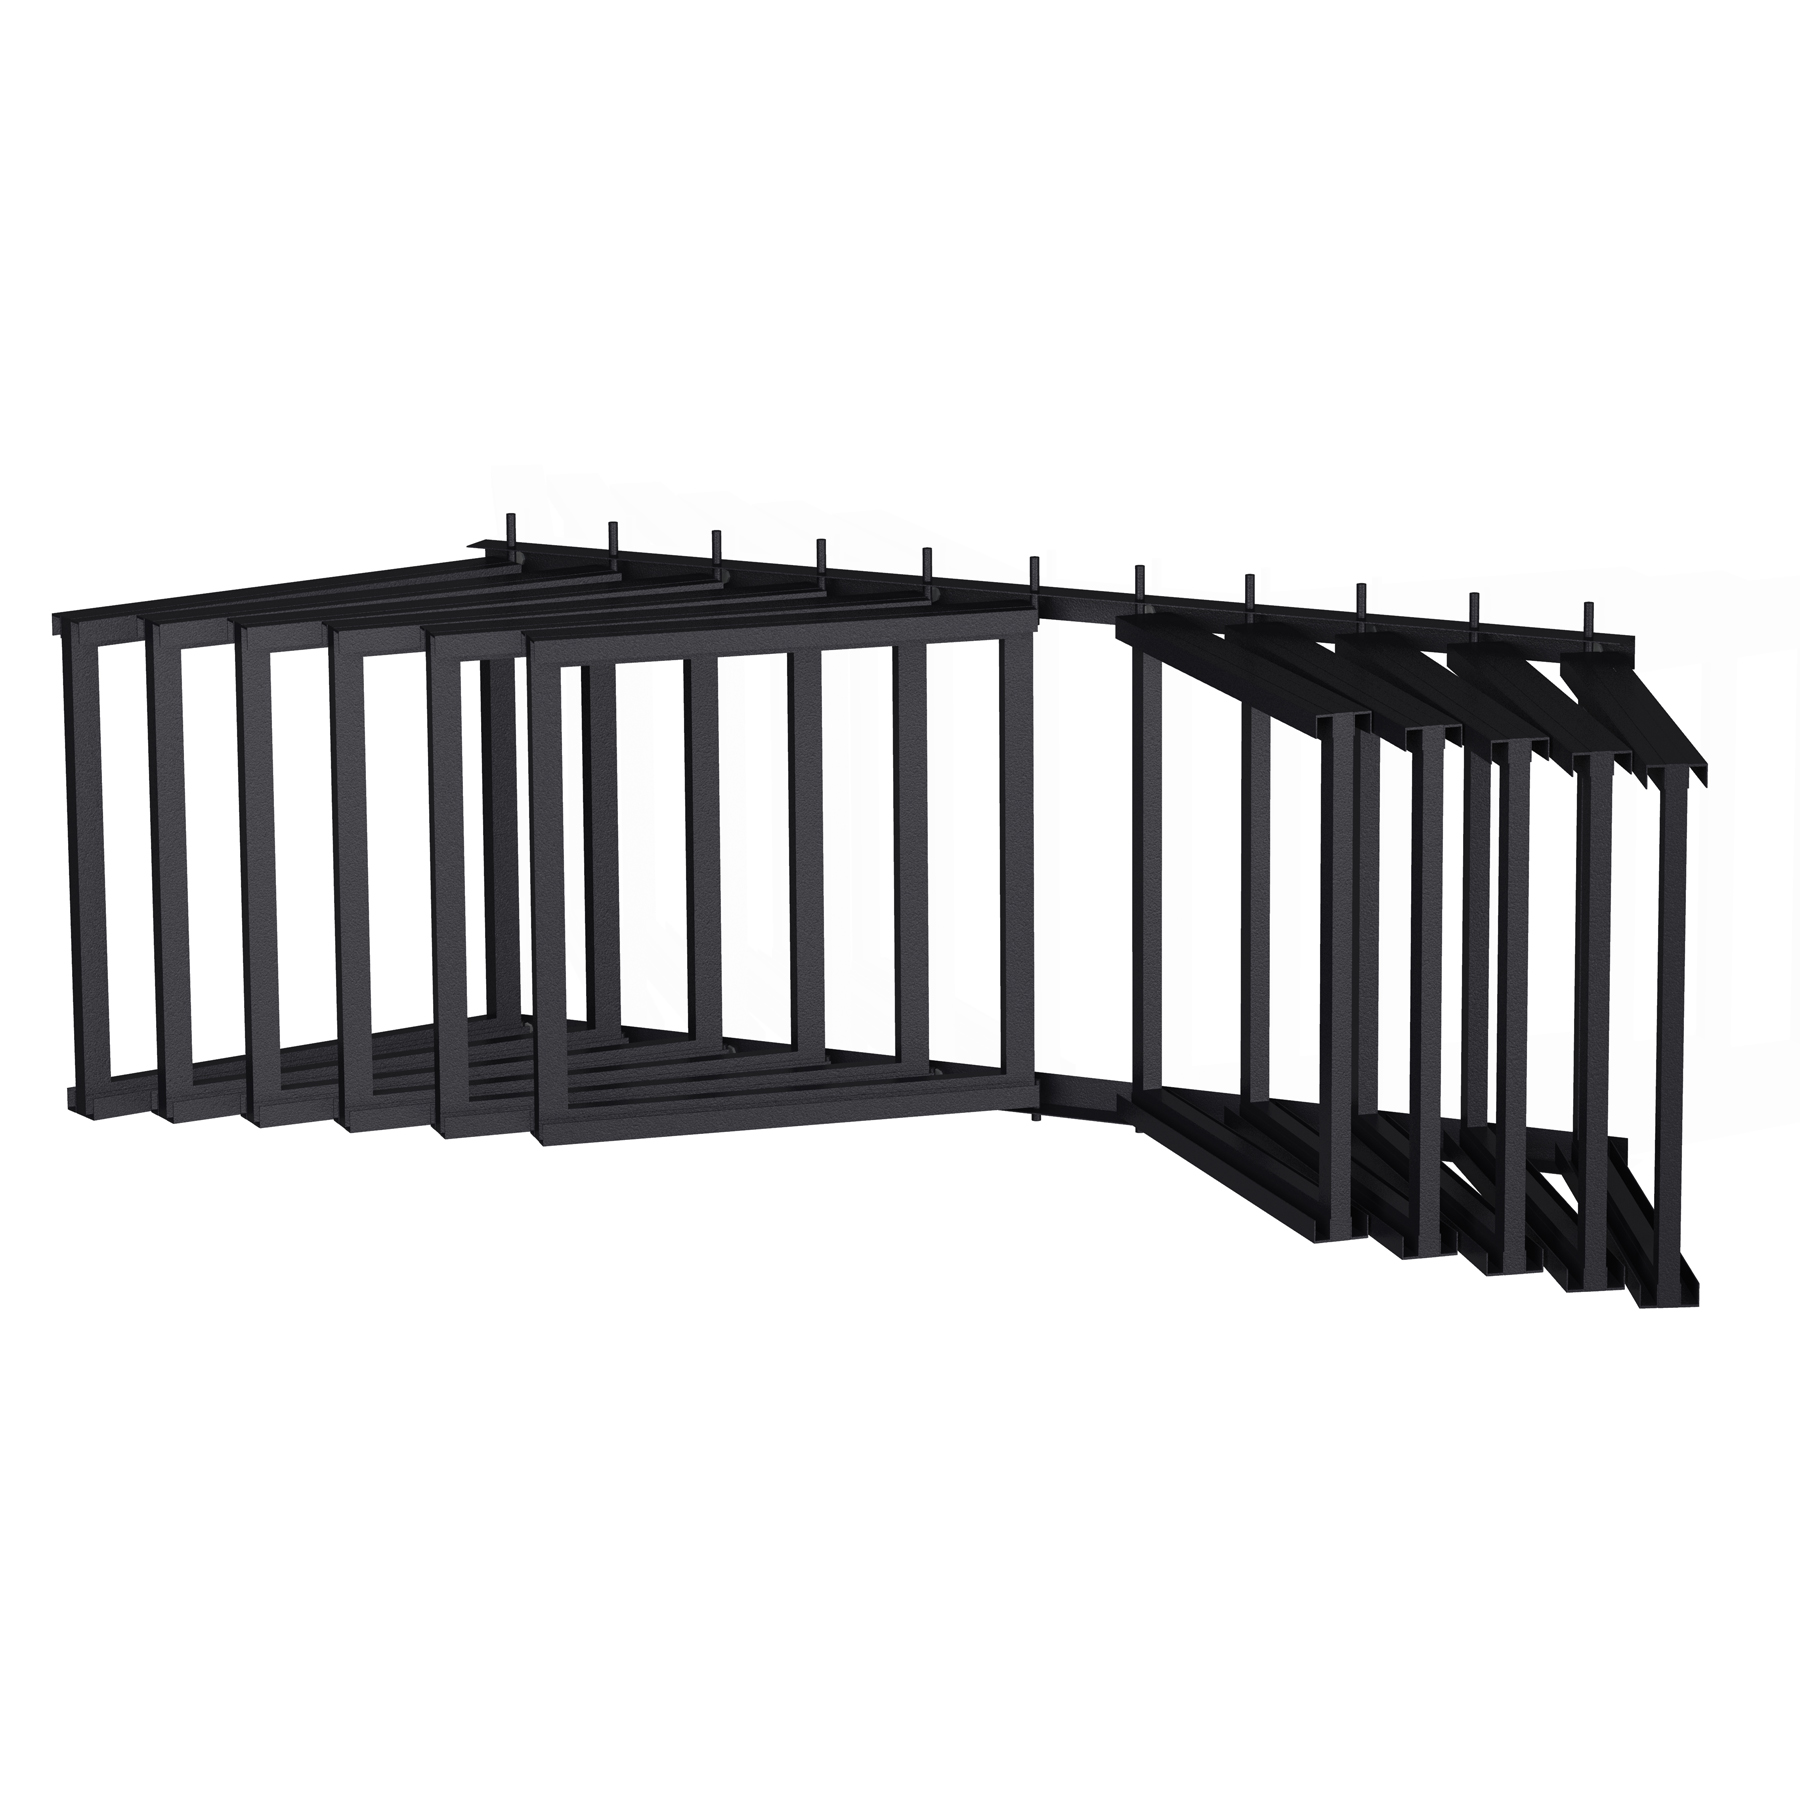 Sturdy Steel Wall Mount Track Wing Rack Style Steel Channel System for Loose Tile Samples Mounts on Showroom Walls